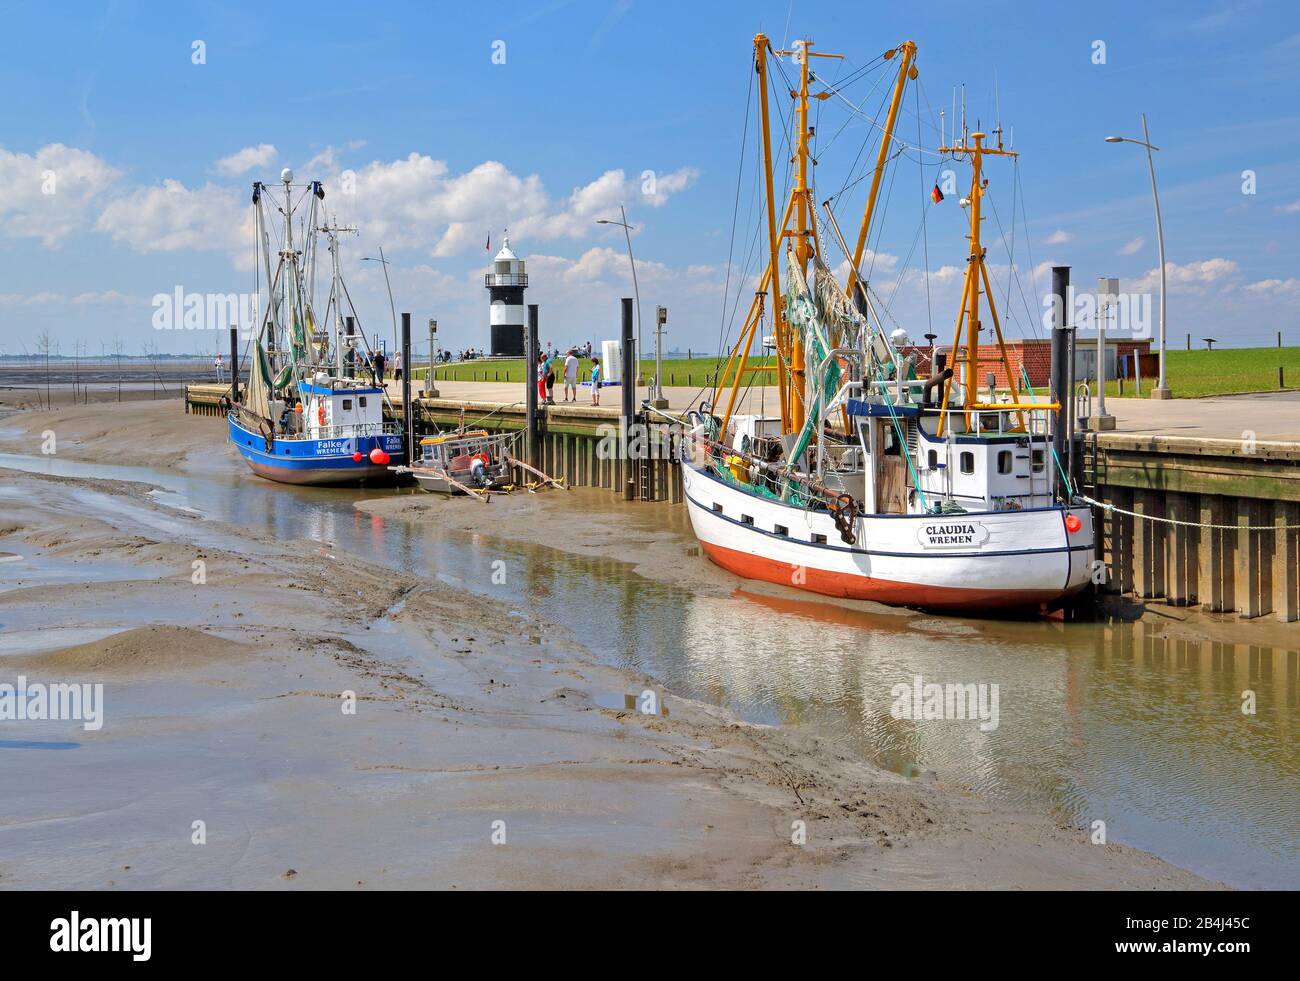 Sielhafen with shrimp cutters at low tide and lighthouse Kleiner Preusse, Nordseebad Wremen, Land Wursten, North Sea, North Sea Coast, Lower Saxony, Germany Stock Photo